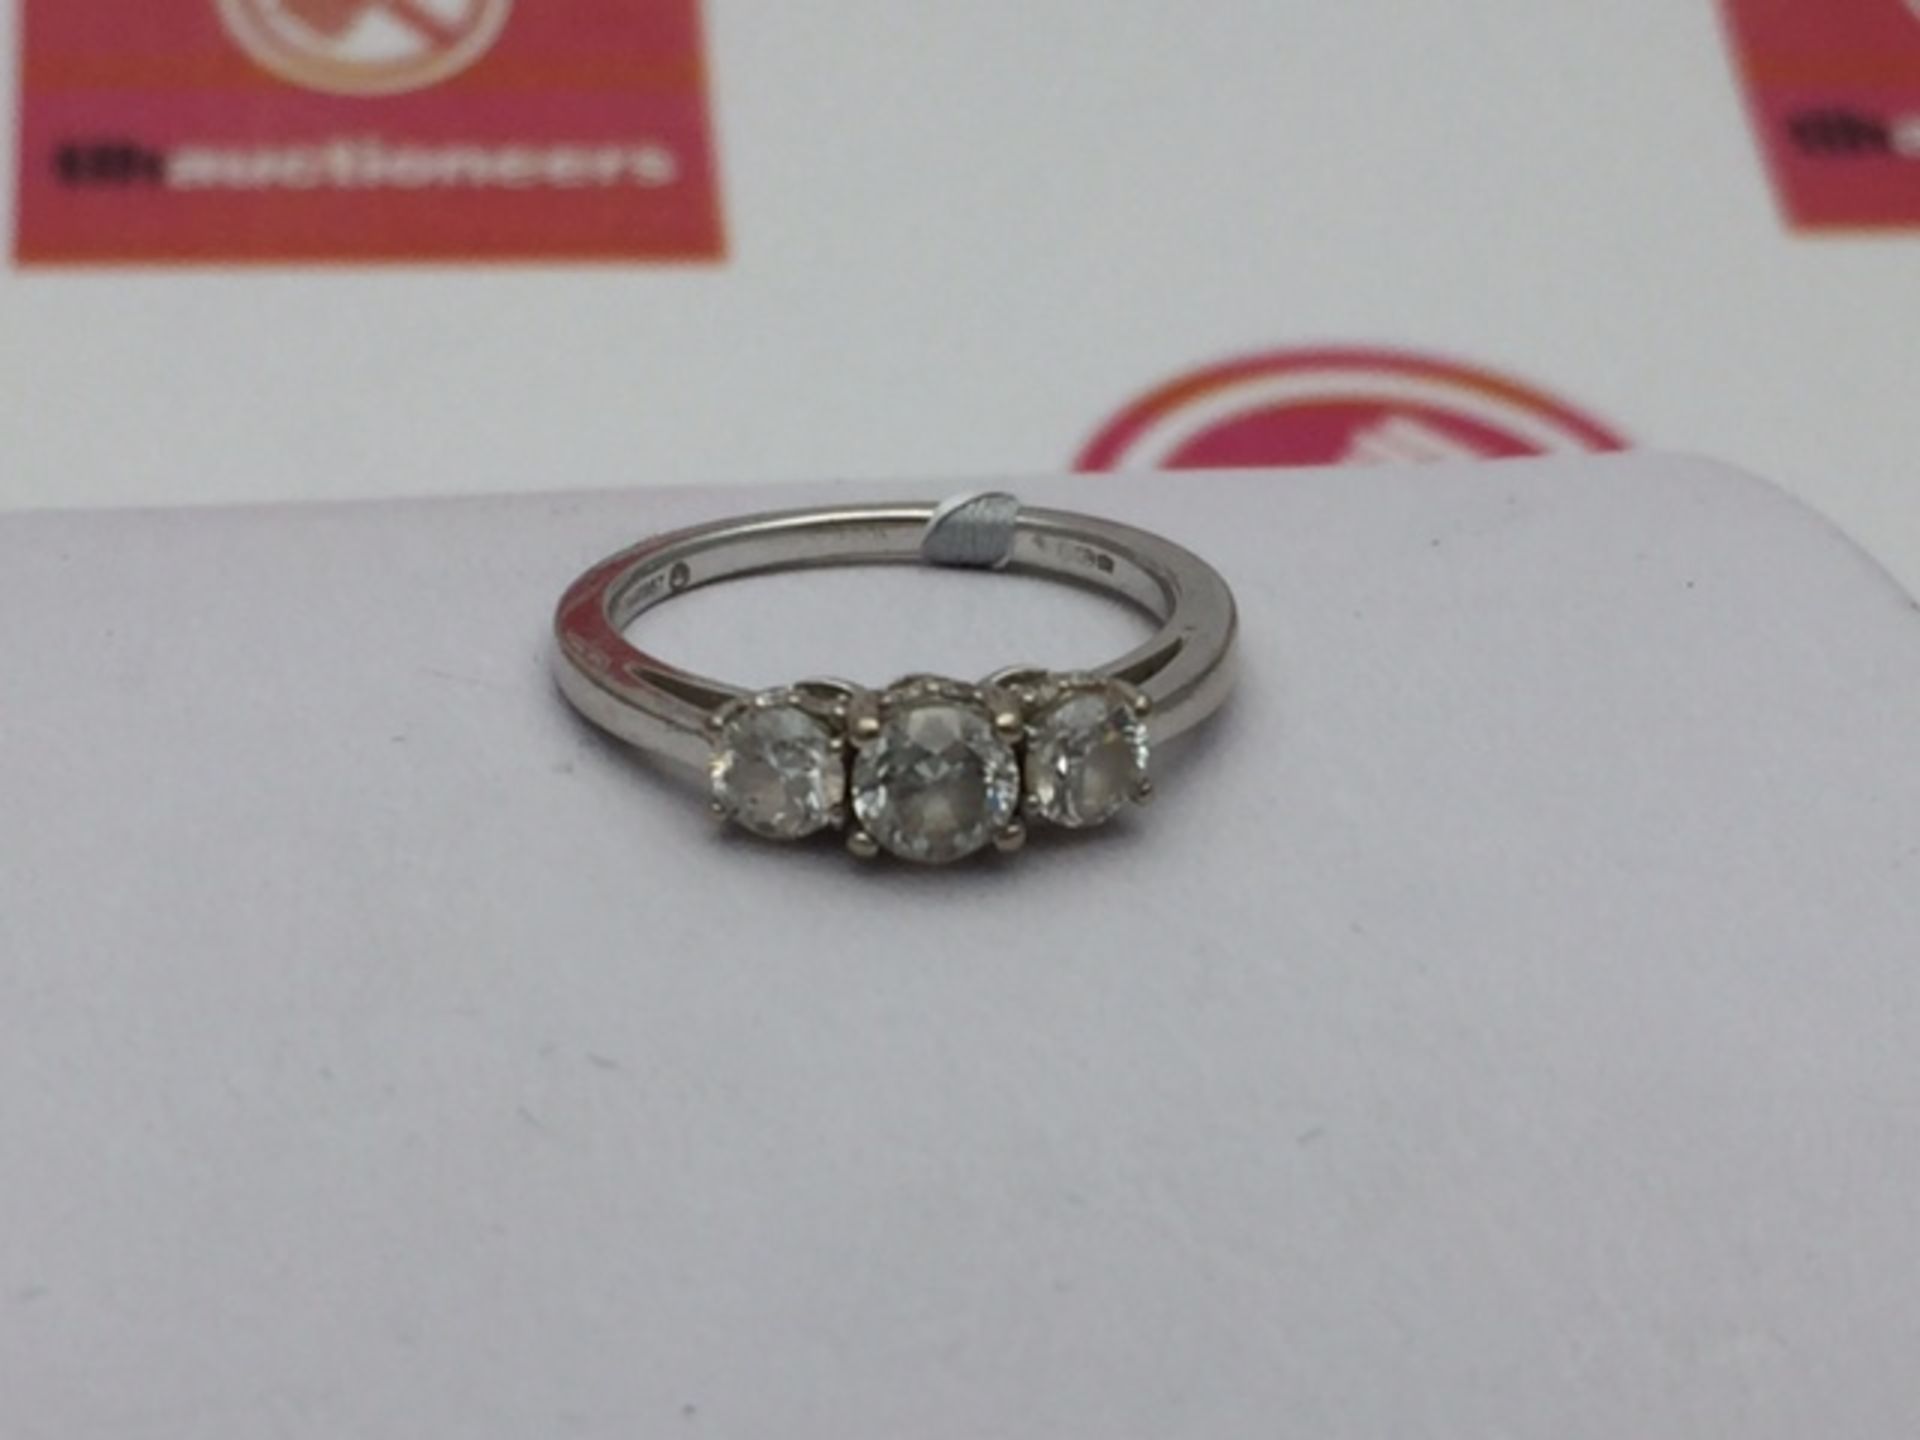 A STUNNING WHITE GOLD RING ORIGINALLY SUPPLIED BY GOLDSMITHS £3,000 SET WITH 3no BRILLIANT ROUND CUT